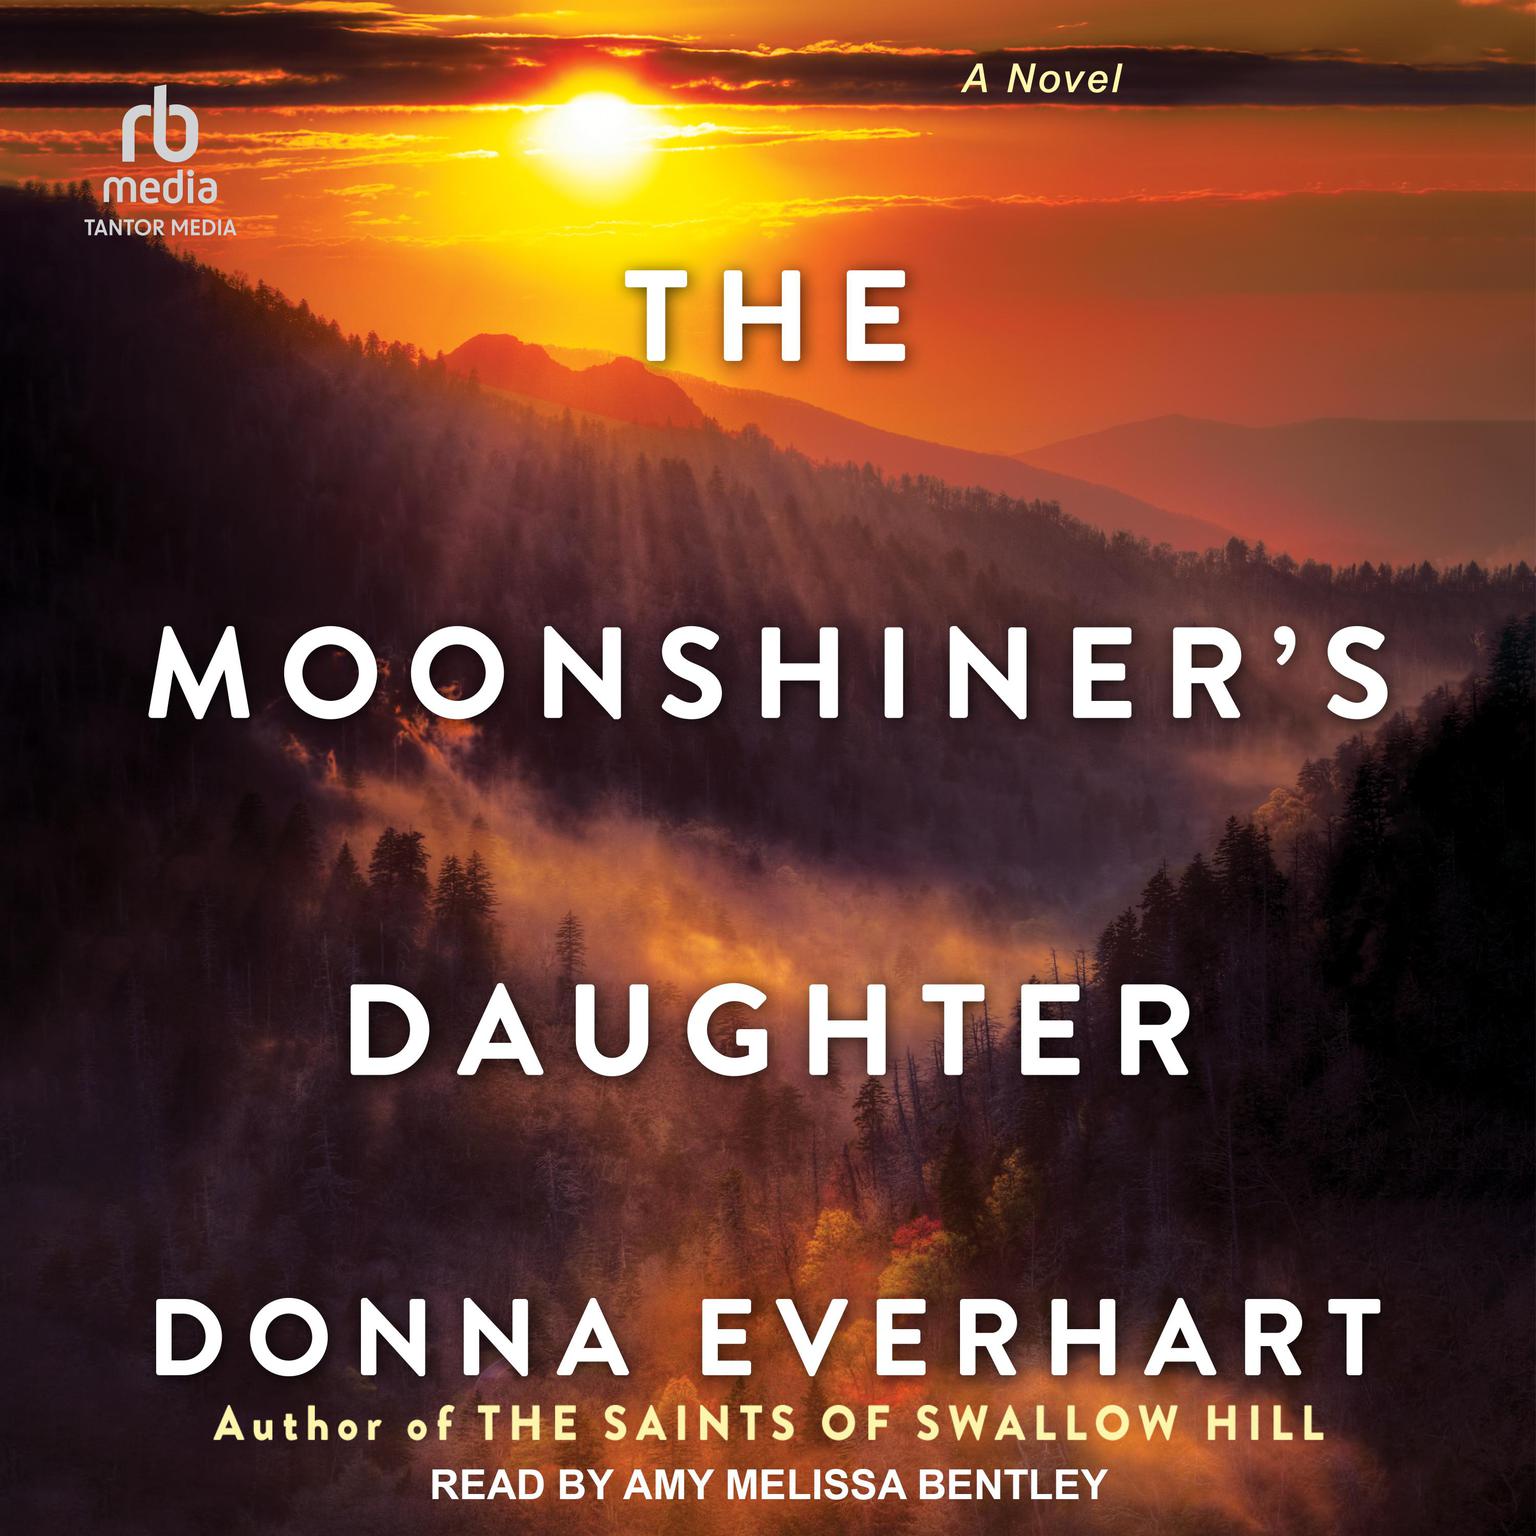 The Moonshiner’s Daughter Audiobook, by Donna Everhart